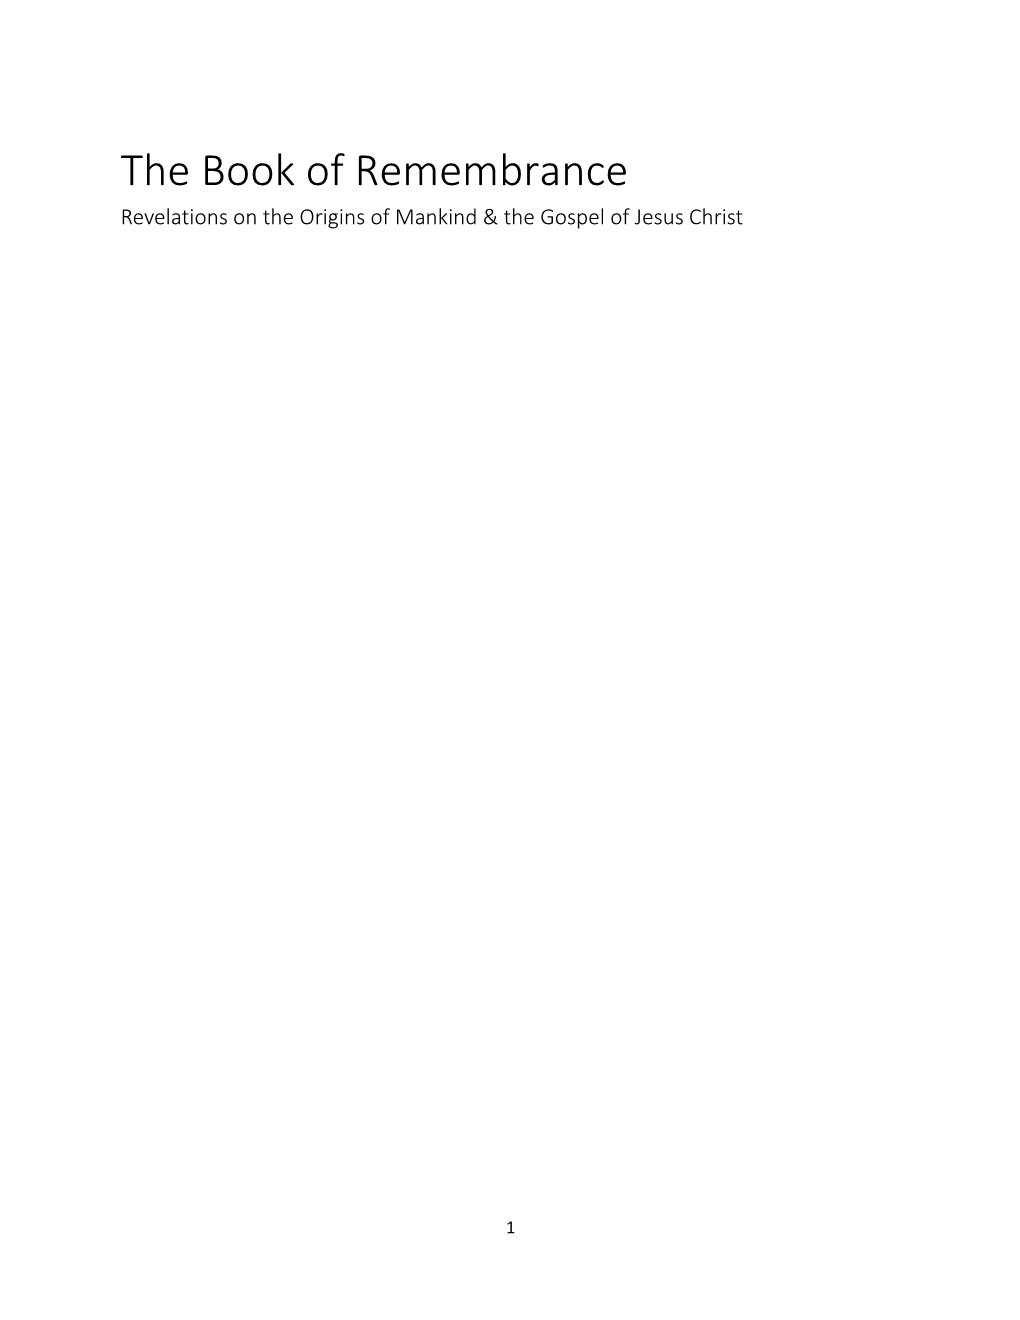 The Book of Remembrance Revelations on the Origins of Mankind & the Gospel of Jesus Christ